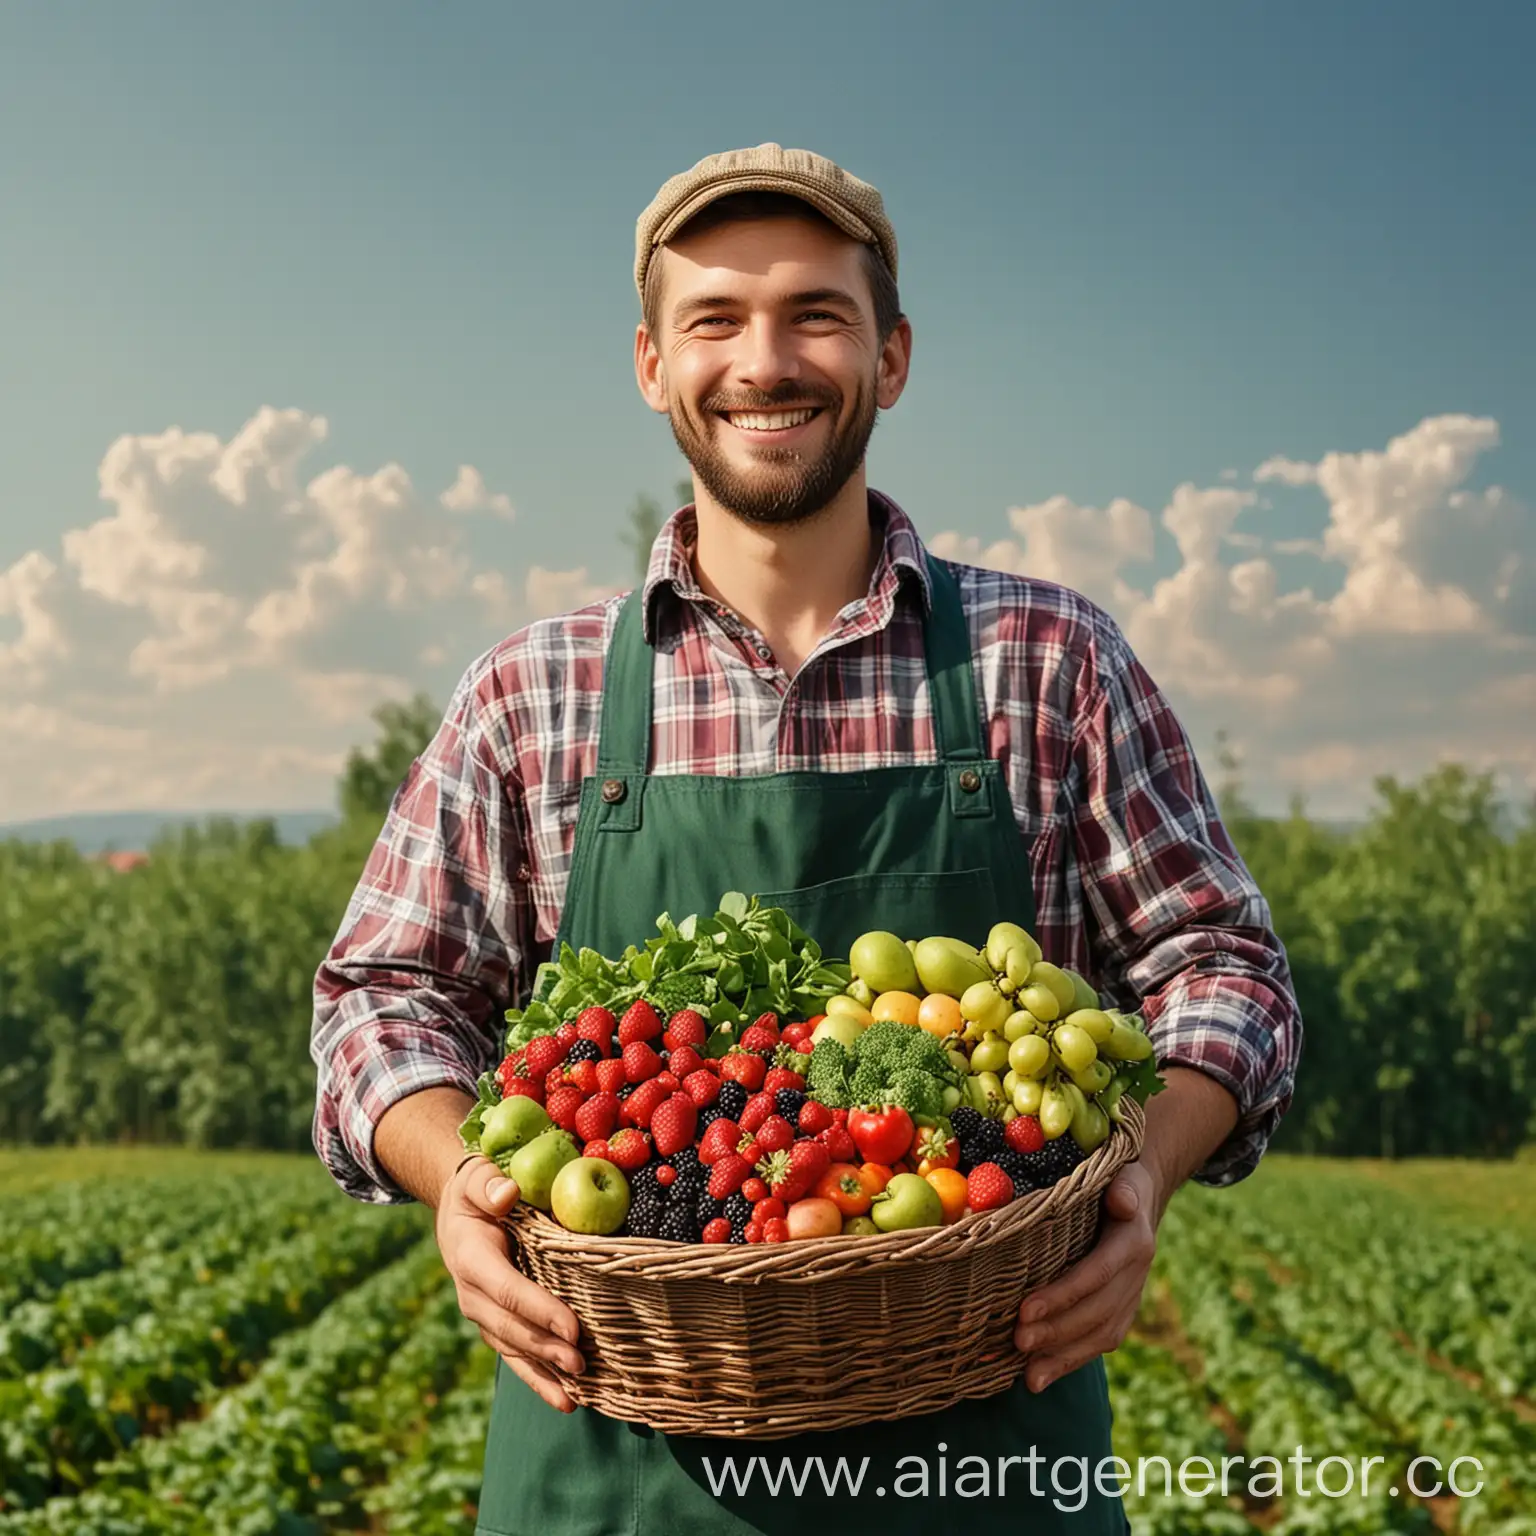 Smiling-Farmer-with-Basket-of-Fresh-Harvest-Realistic-Portrait-in-Green-Apron